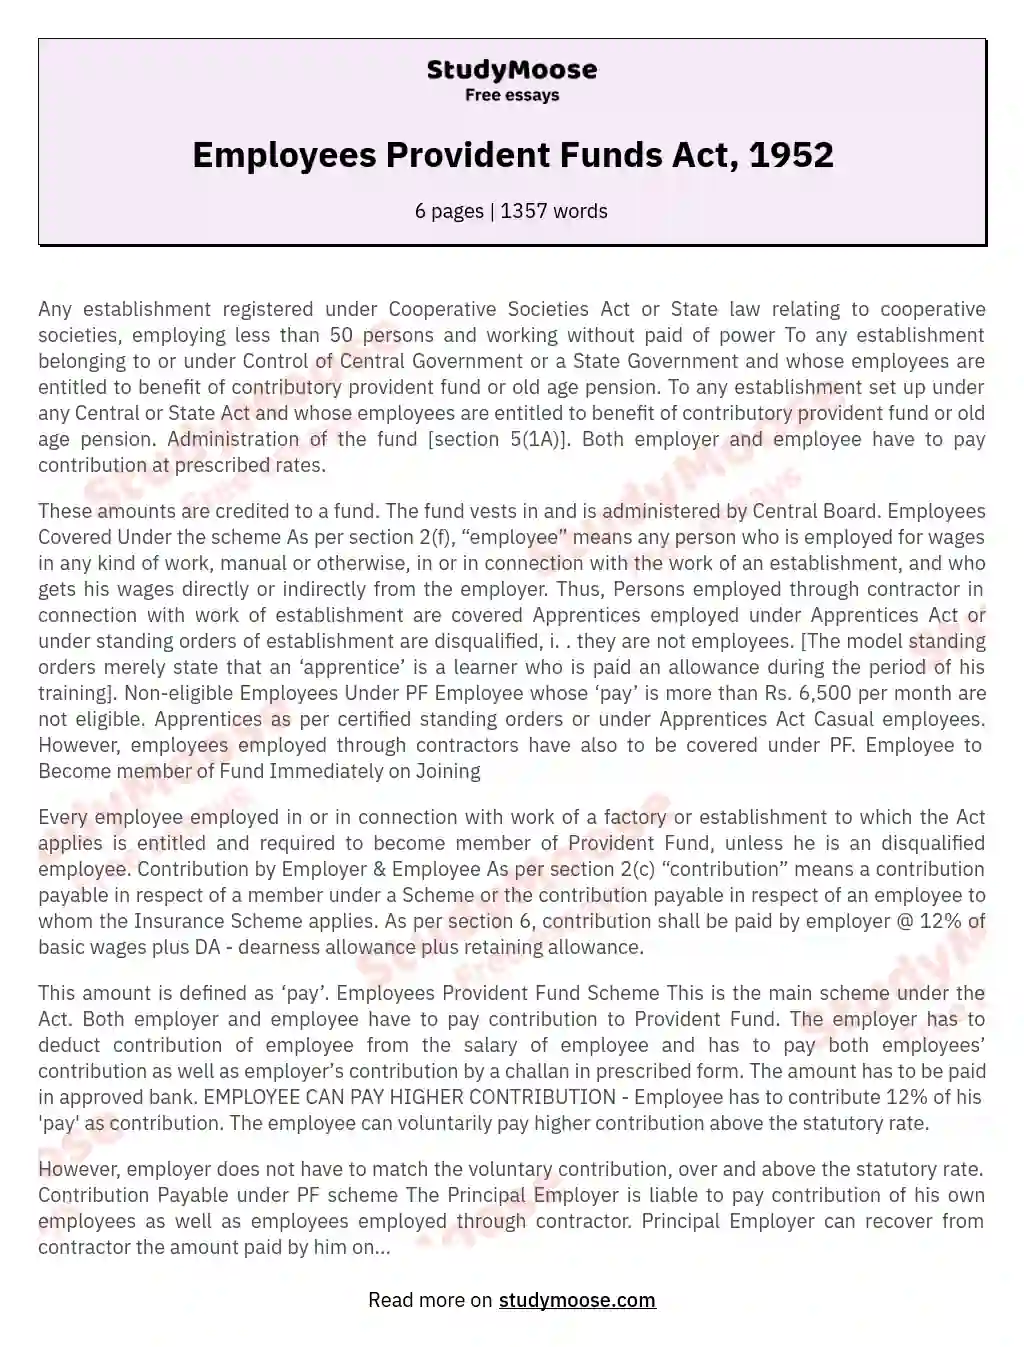 Employees Provident Funds Act, 1952 essay